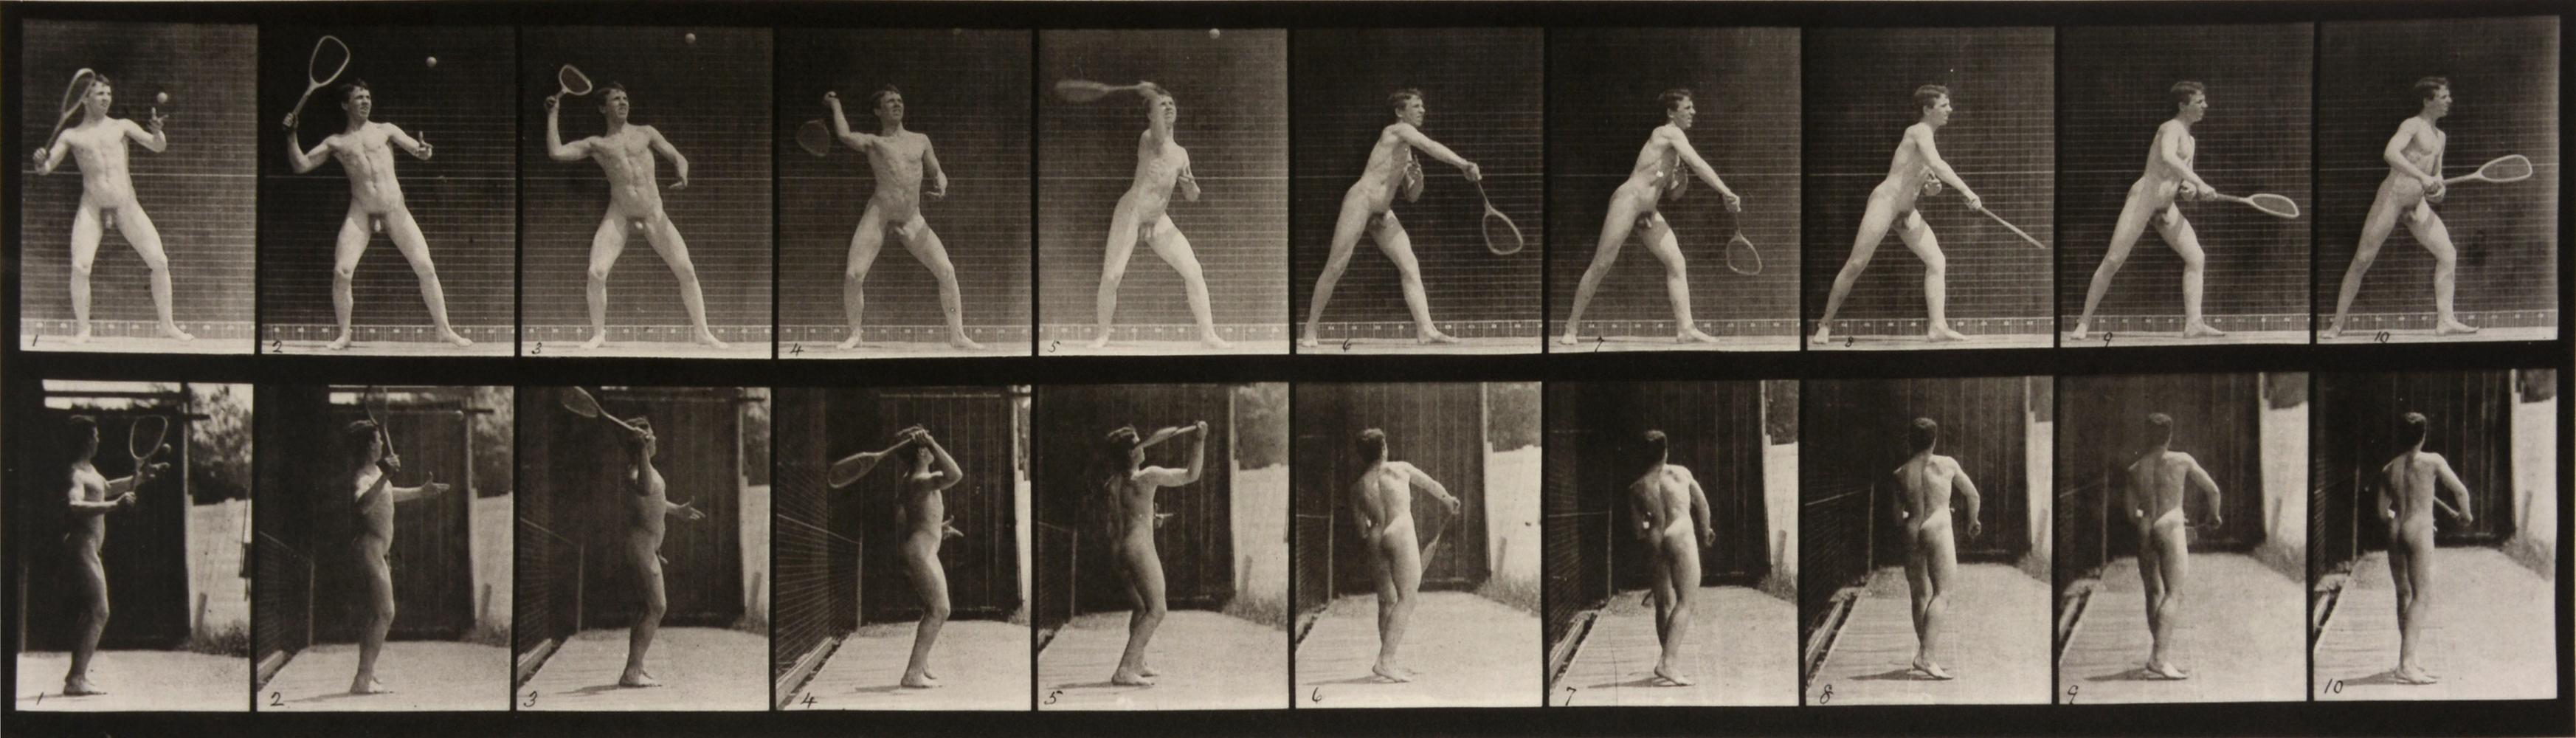 Animal Locomotion: Plate 294 (Man Playing Tennis), 1887 - Eadweard Muybridge
Inscribed with Muybridge's Letterpress credit, series title, plate number and date.
Stamped with Museum of Edinburgh's 'Science and Art' stamp on reverse
Collotype